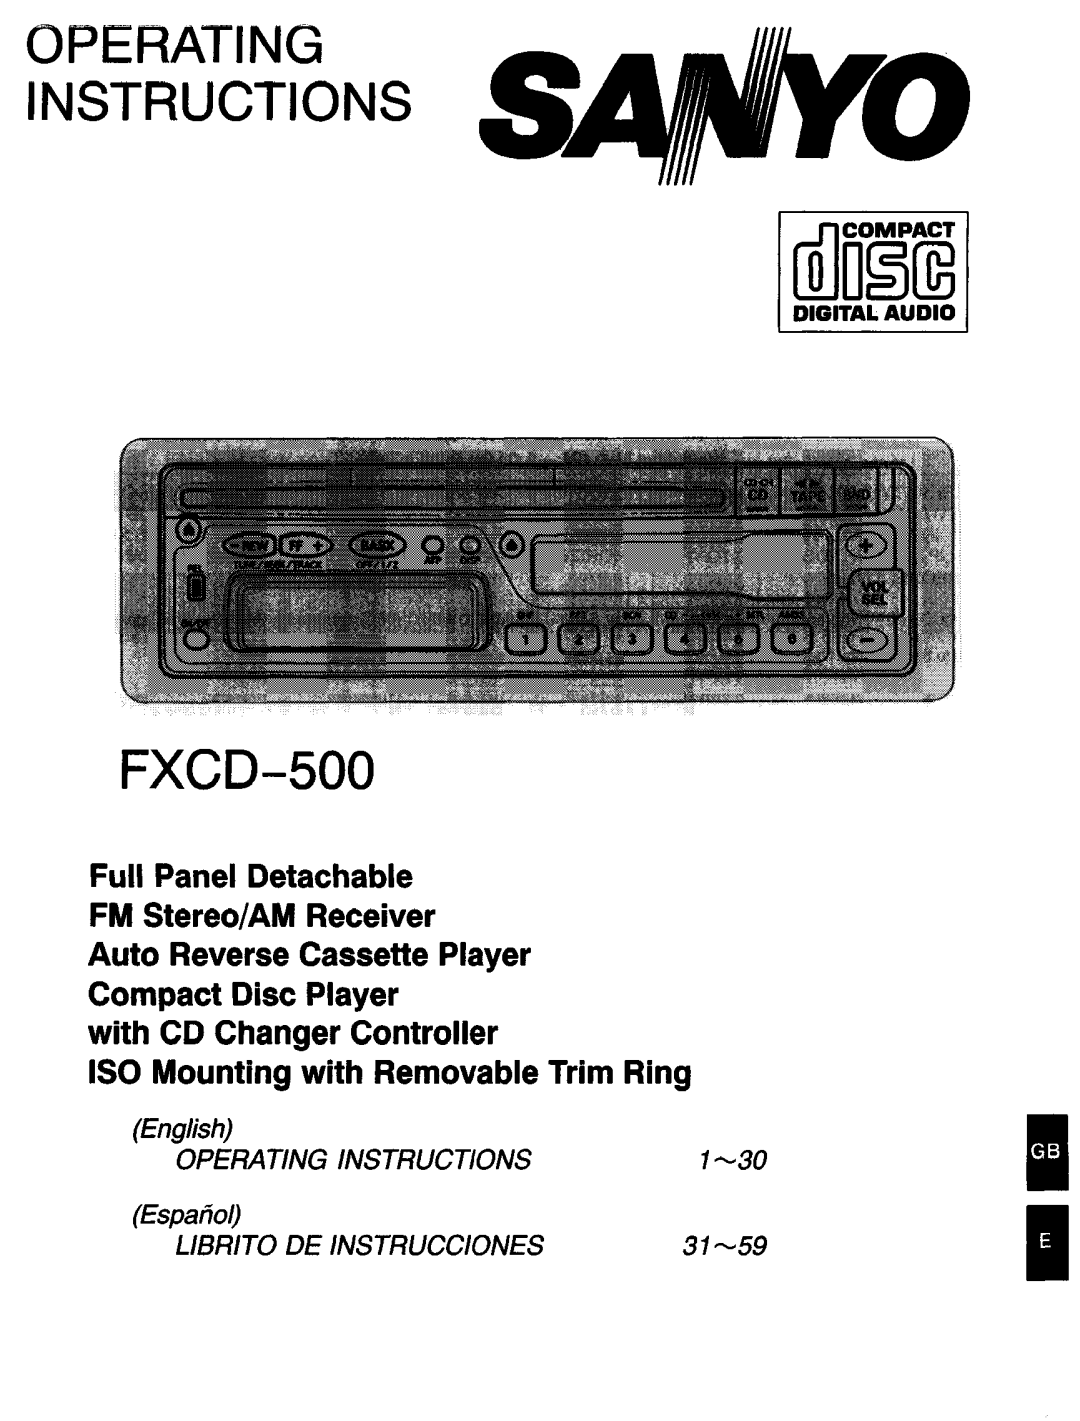 Sanyo manual OPERATING INSTRUCTIONS FXCD-500, Full Panel Detachable FM Stereo/AM Receiver, with CD Changer Controller 